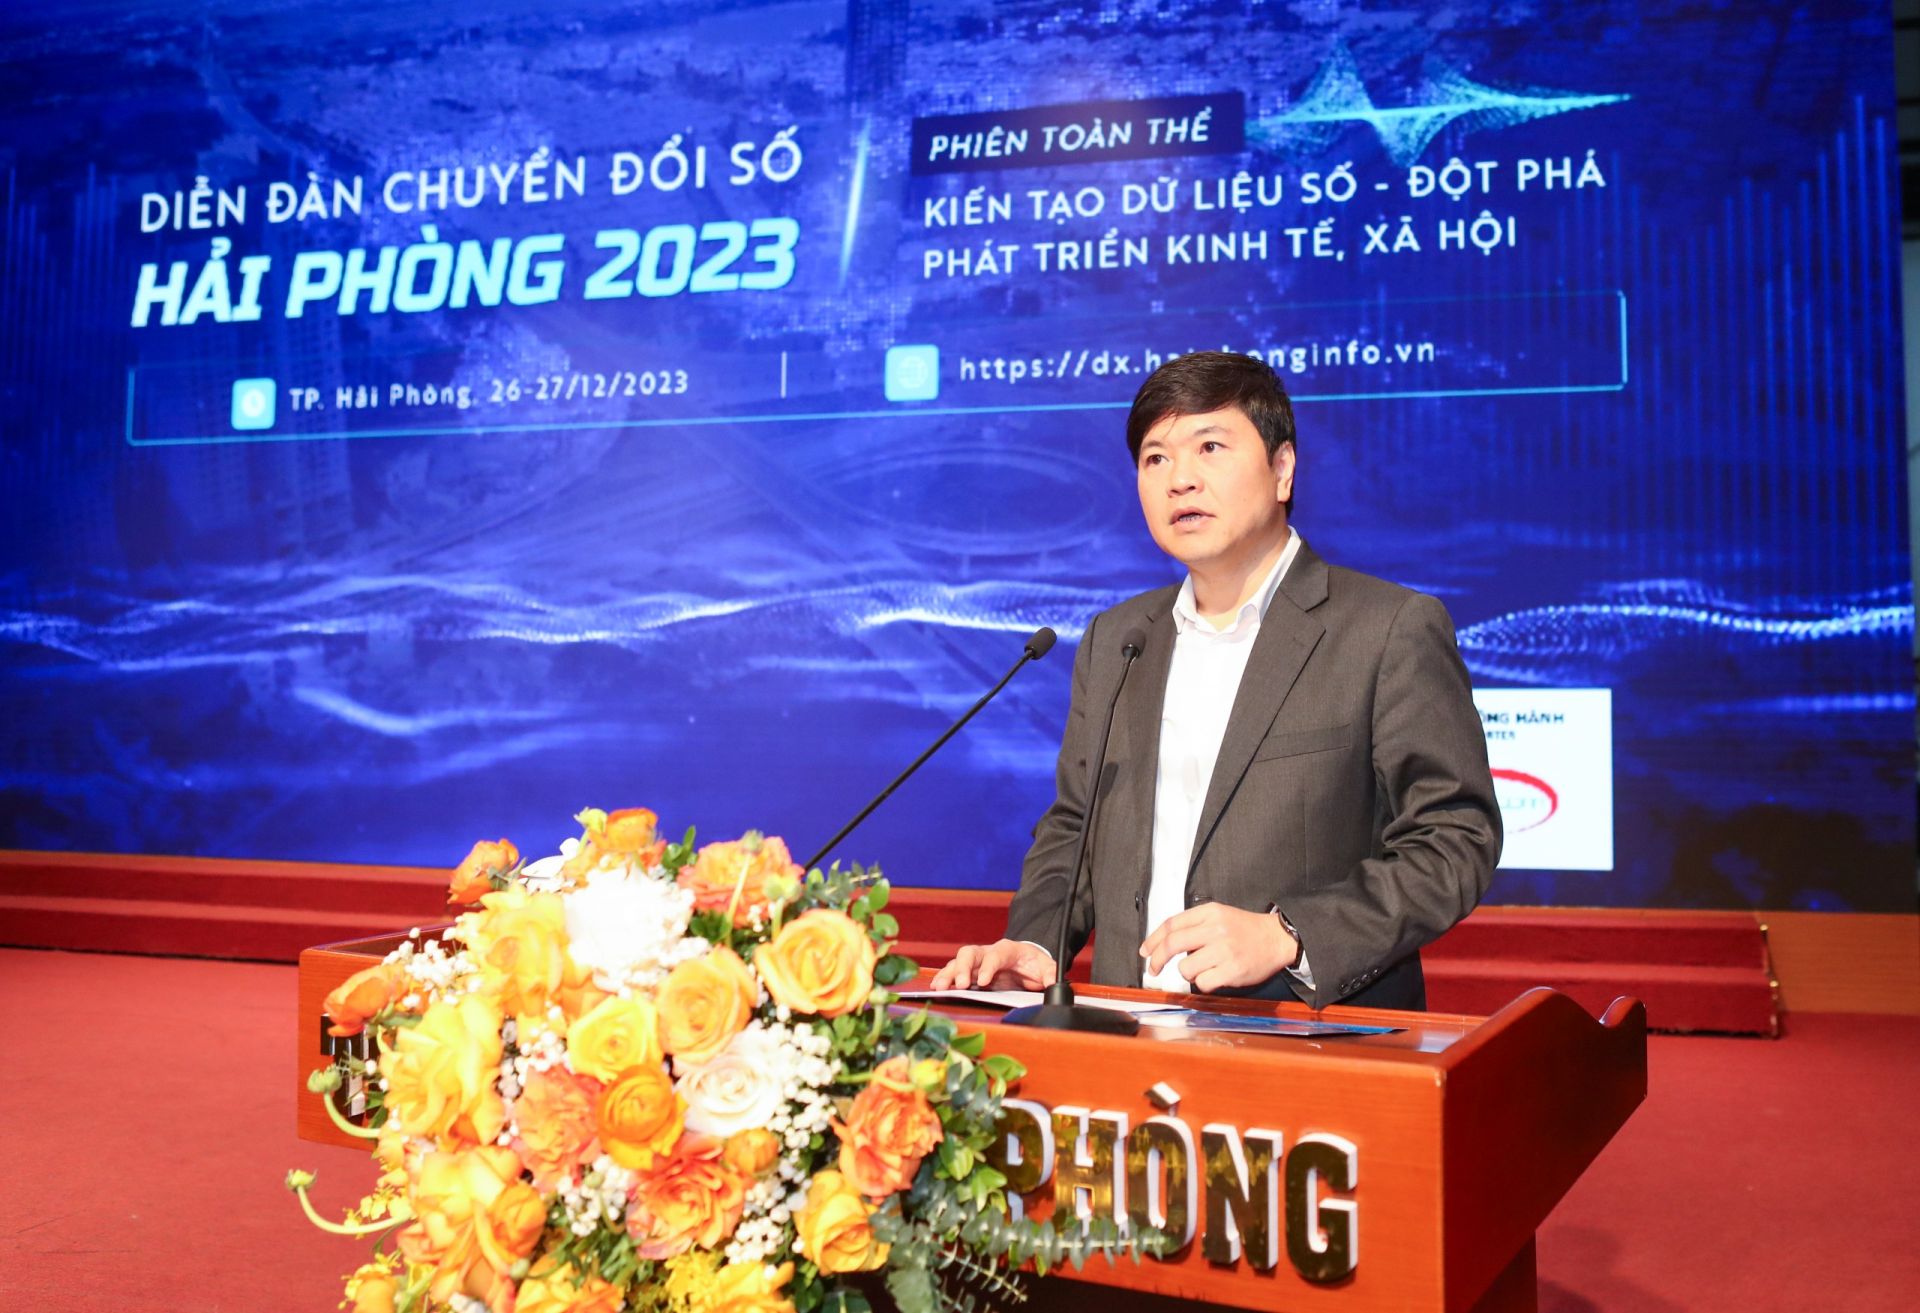 Speaking during the forum is Mr. Hoang Minh Cuong, vice chairman of the Hai Phong City People's Committee